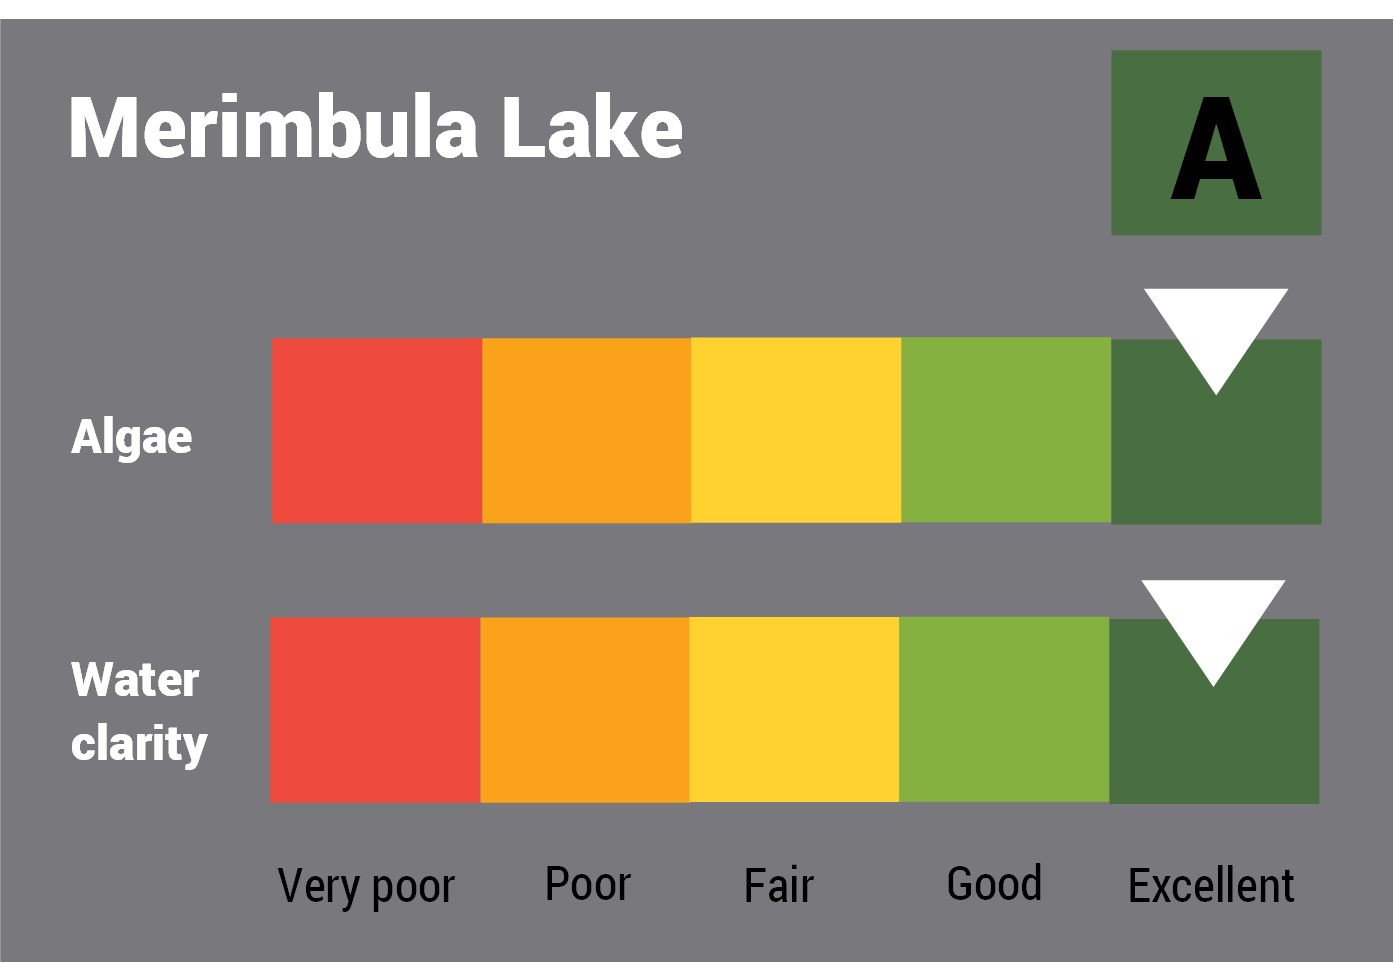 Merimbula Lake water quality report card for algae and water clarity showing colour-coded ratings (red, orange, yellow, light green and dark green, which represent very poor, poor, fair, good and excellent, respectively). Algae is rated 'excellent' and water clarity is rated 'good' giving an overall rating of 'good' or 'B'.